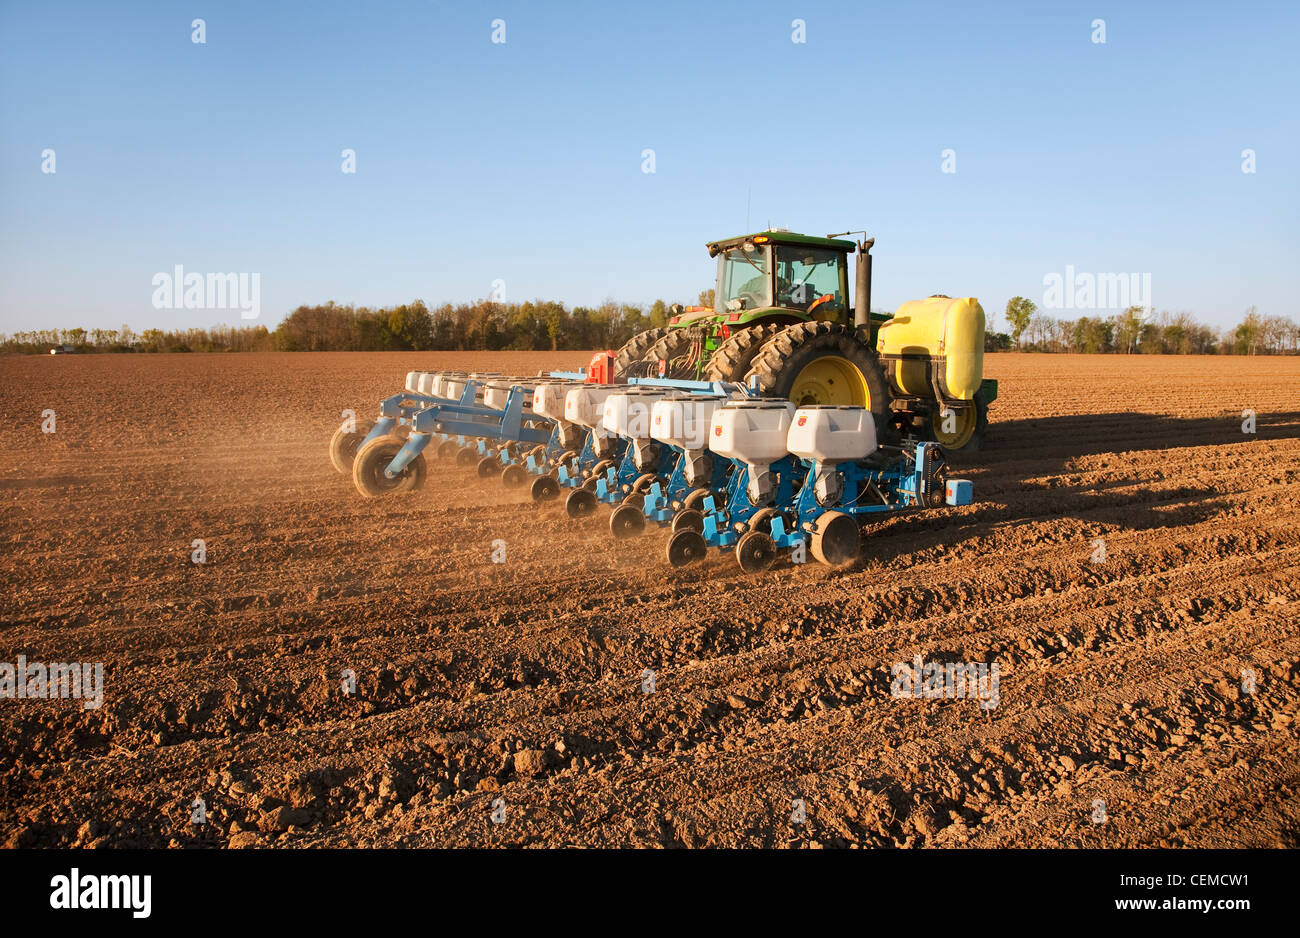 Agriculture - A John Deere tractor and Monosem 24 twin-row planter plants grain corn in a conventionally tilled field / Arkansas Stock Photo